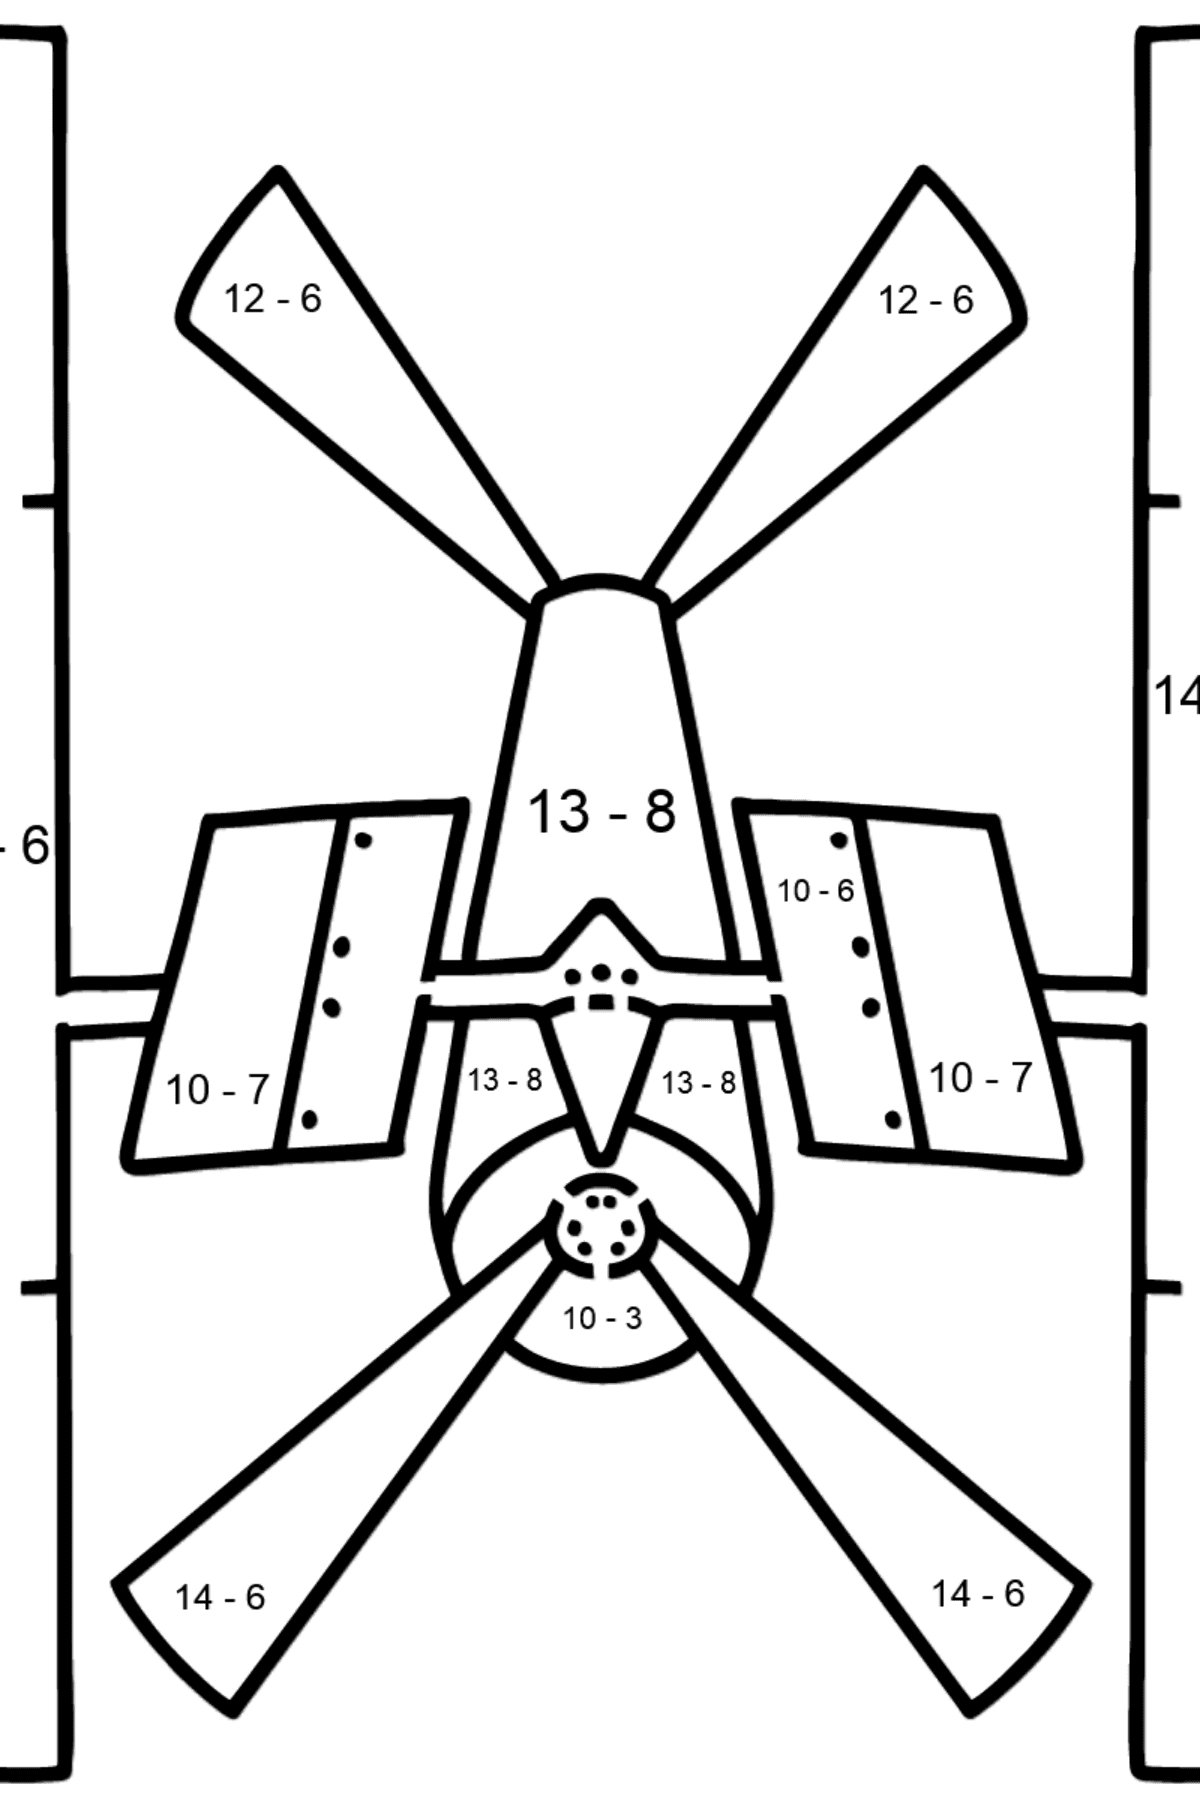 Space Station coloring page - Math Coloring - Subtraction for Kids